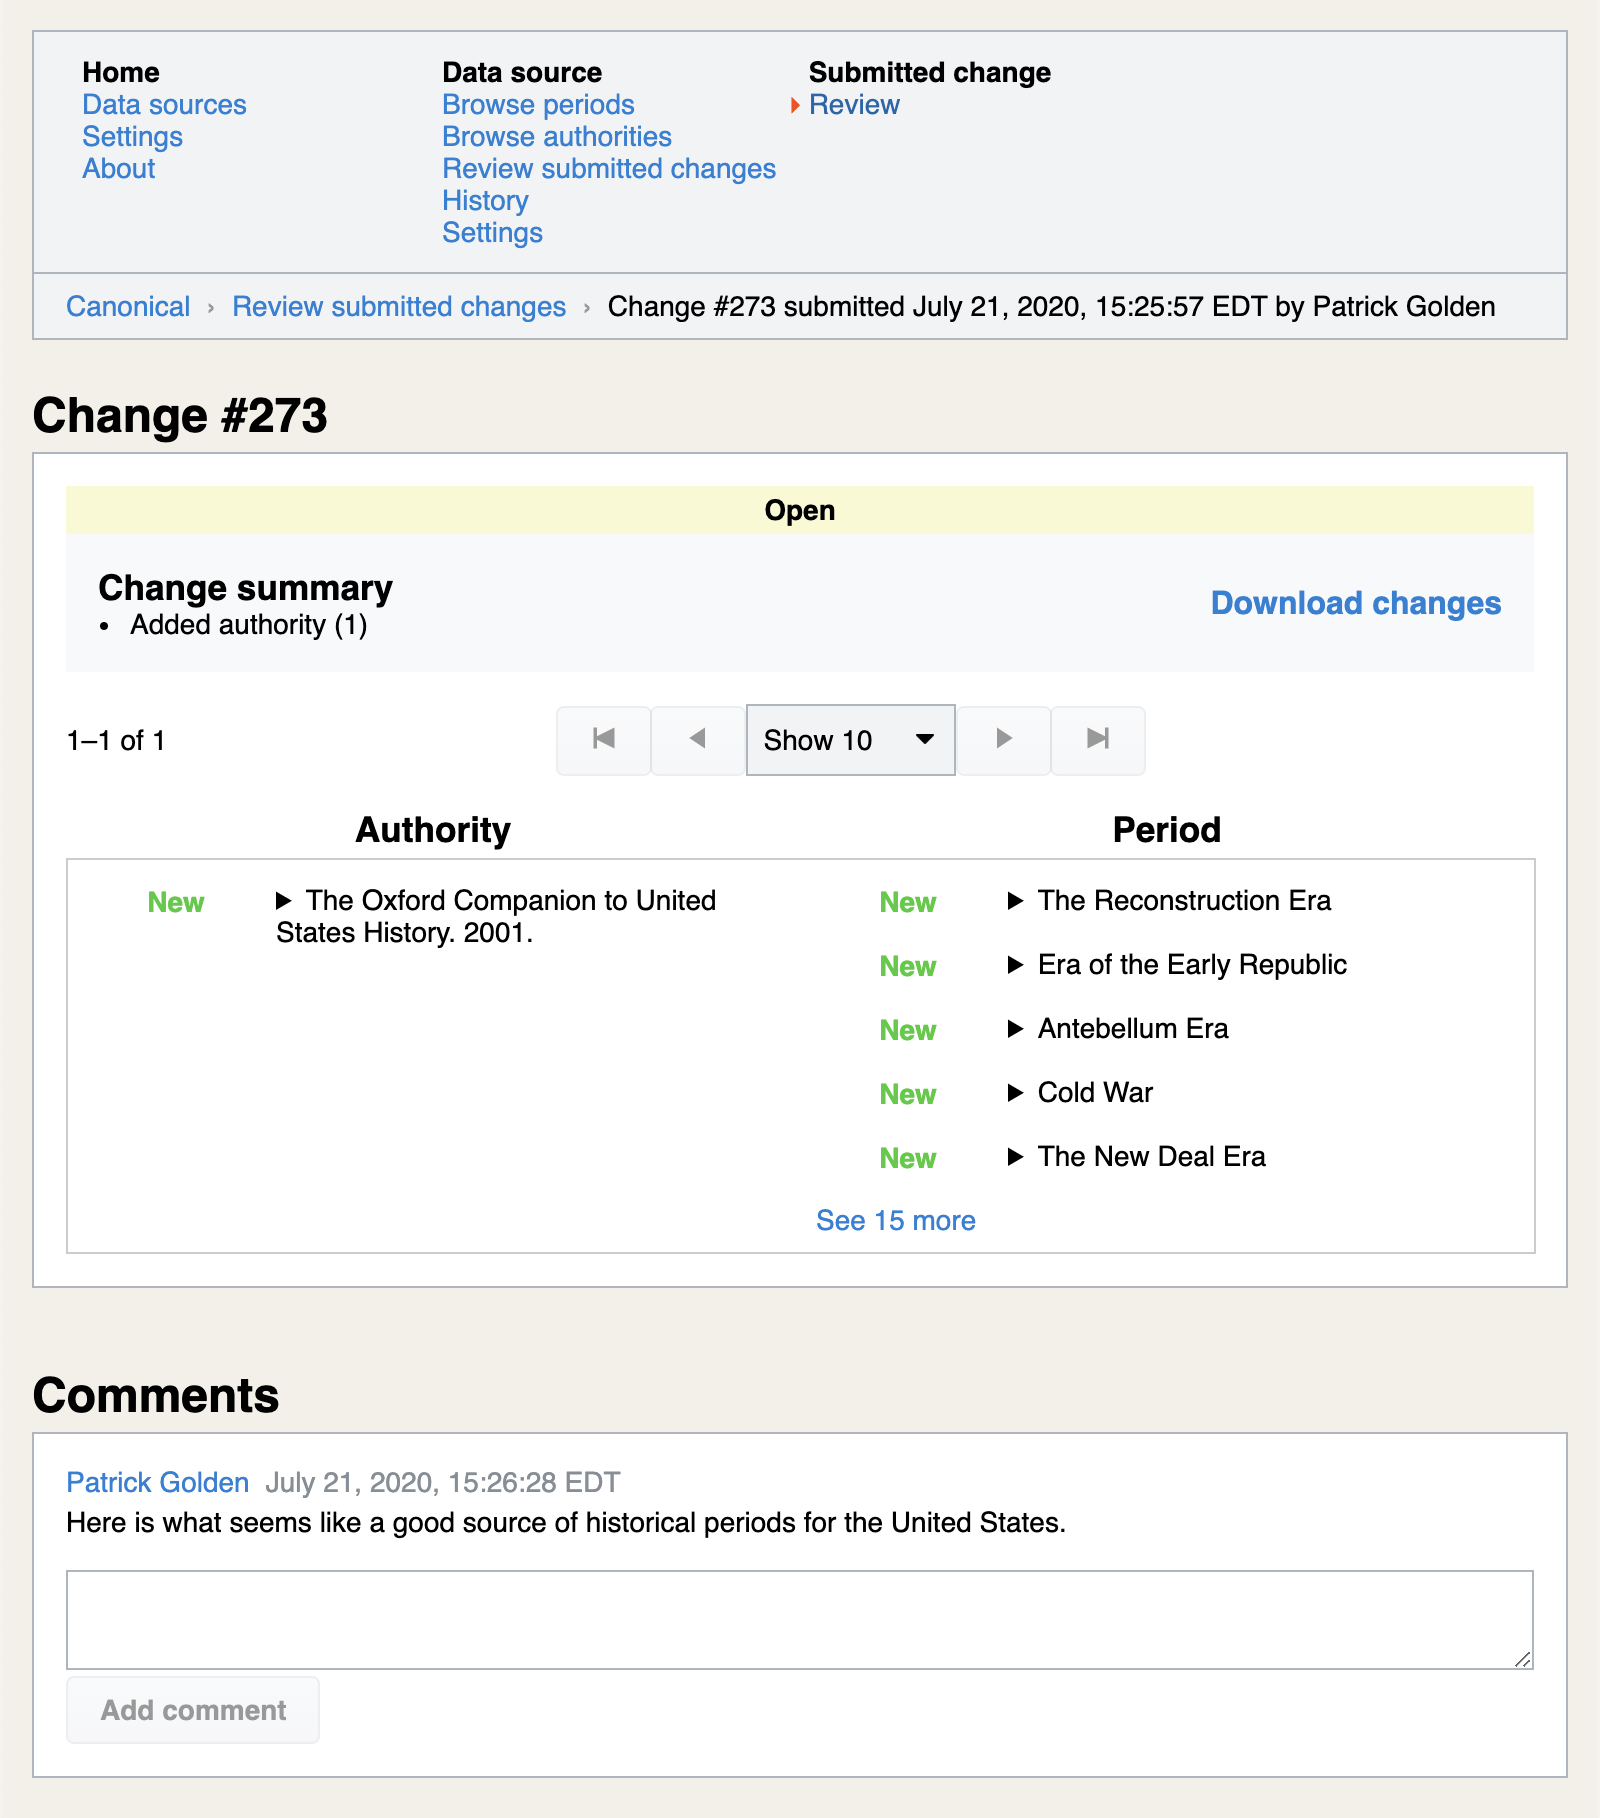 Viewing comments on submitted changes to the canonical periods